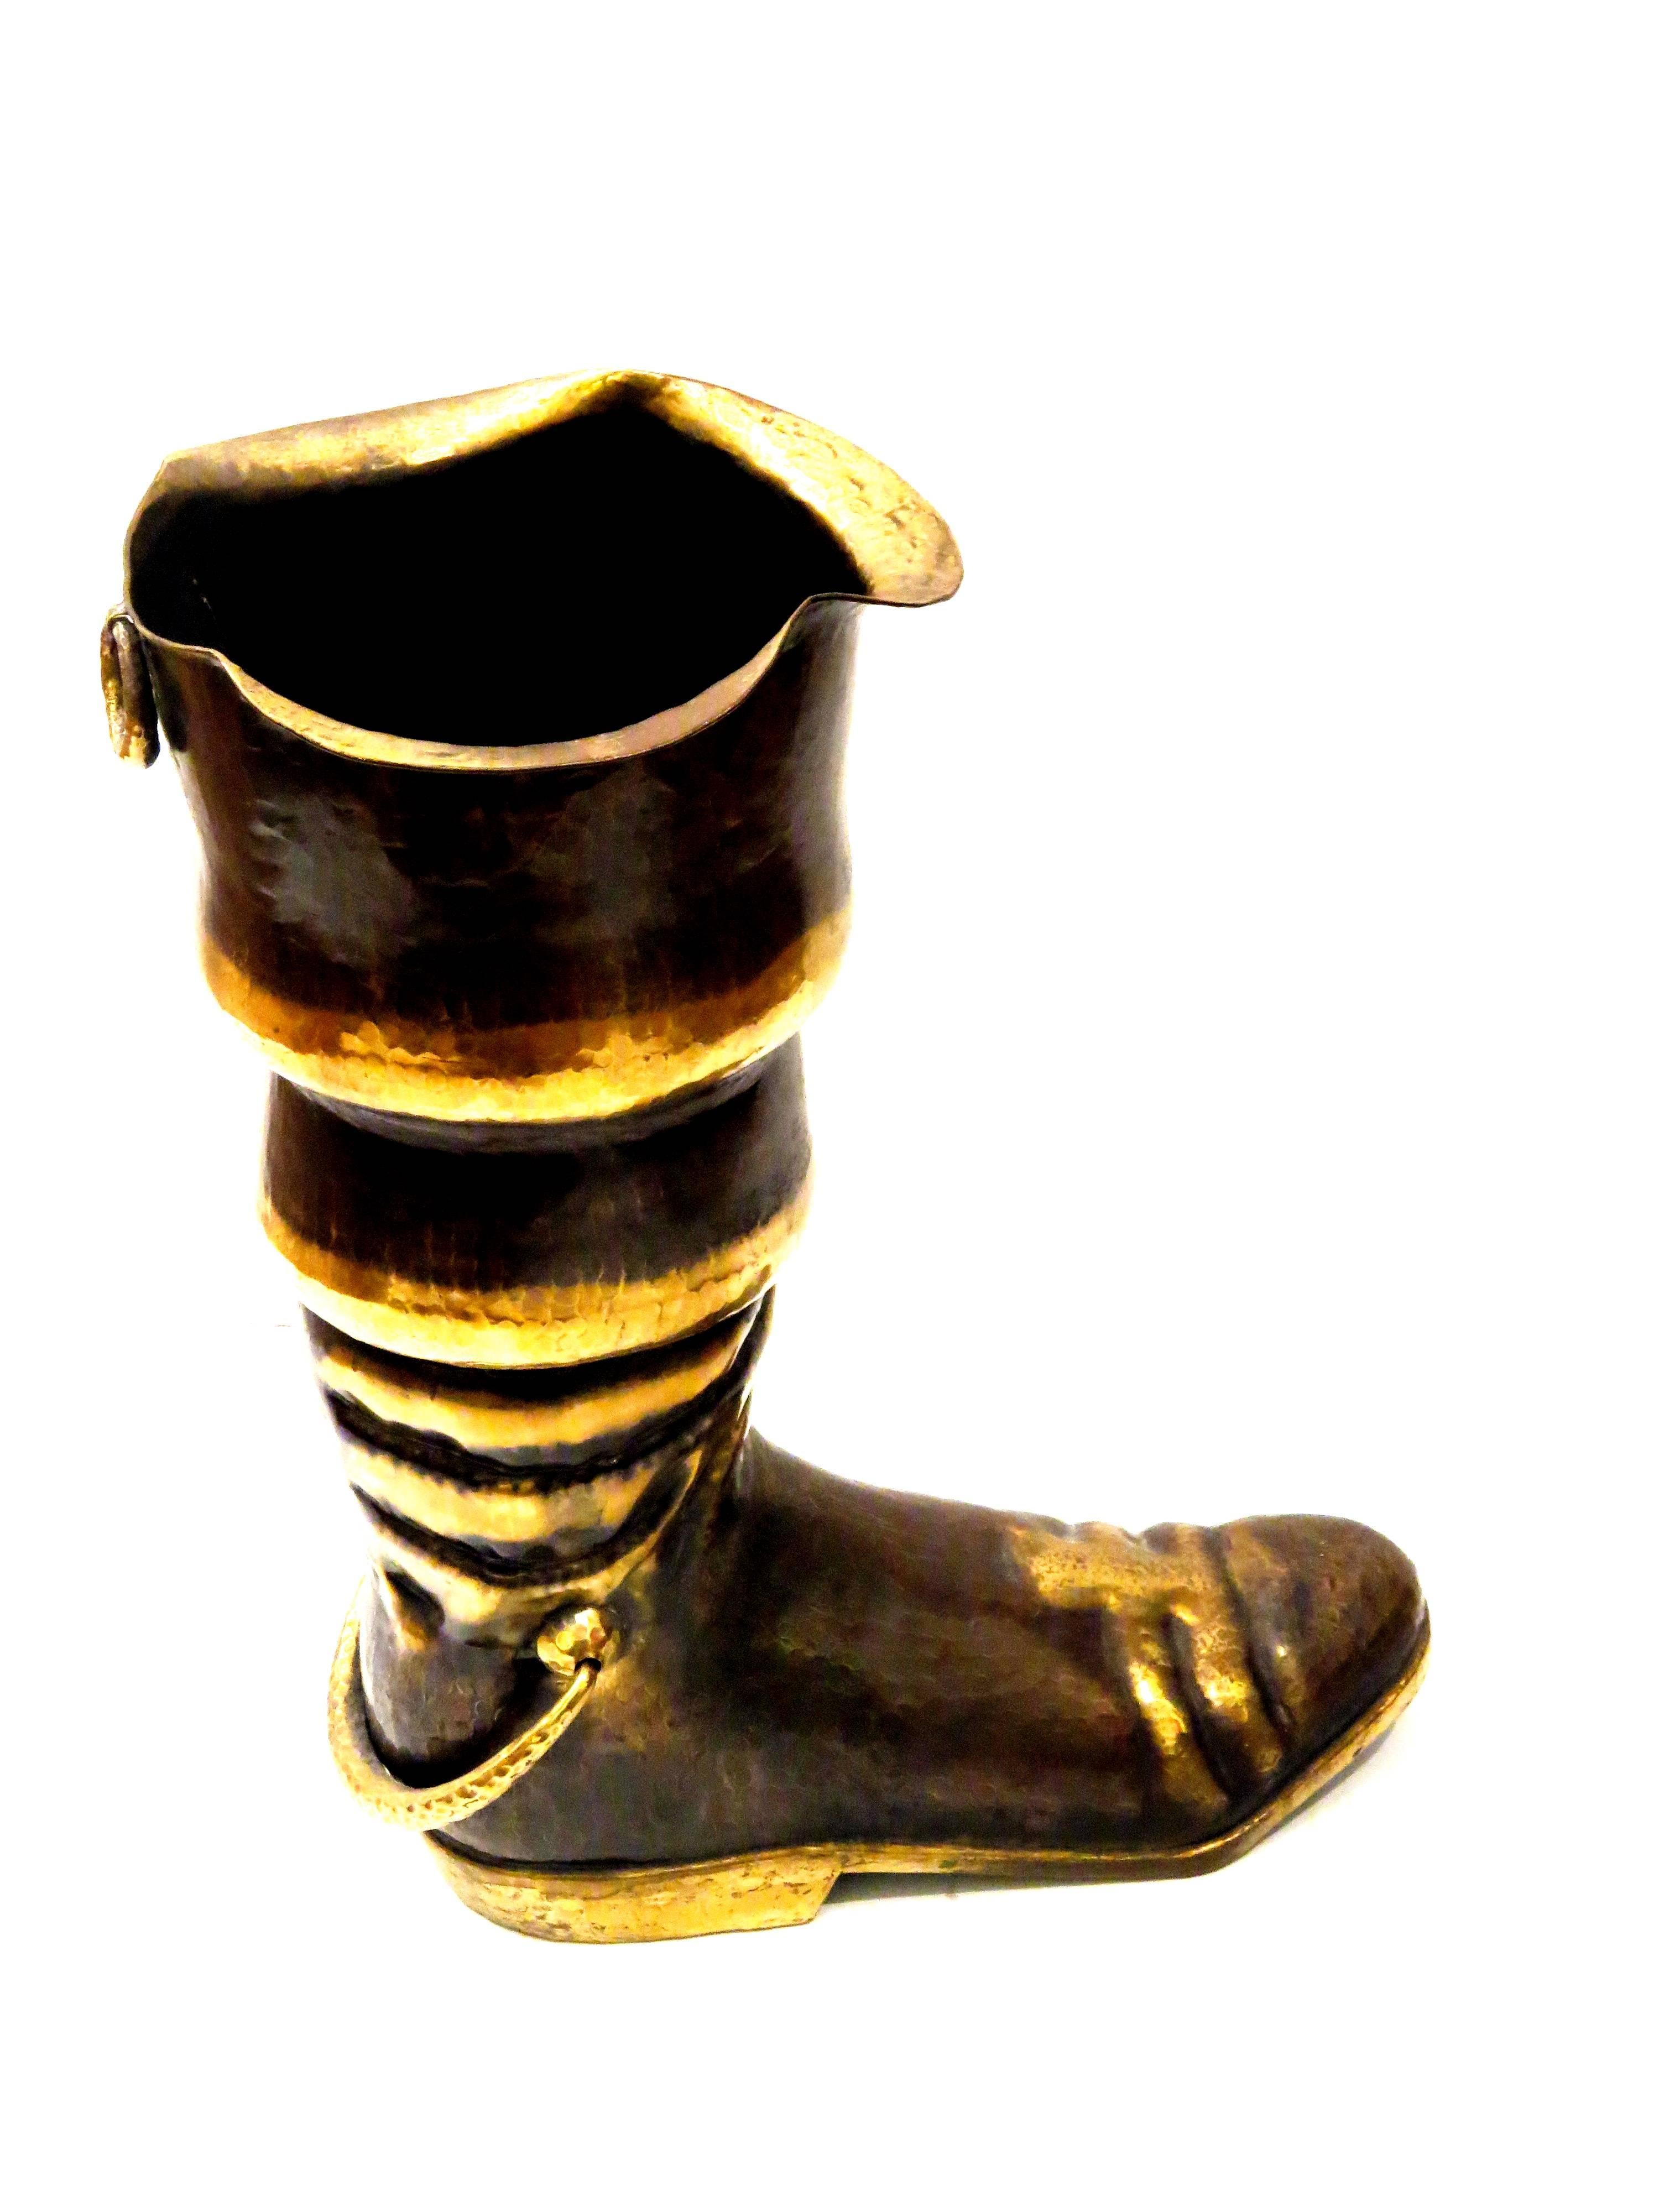 A very unique solid patinated brass hammered large pirate boot, great detail and a conversation piece, Made in Italy, circa 1950s, nice original condition. Stamped on the bottom.